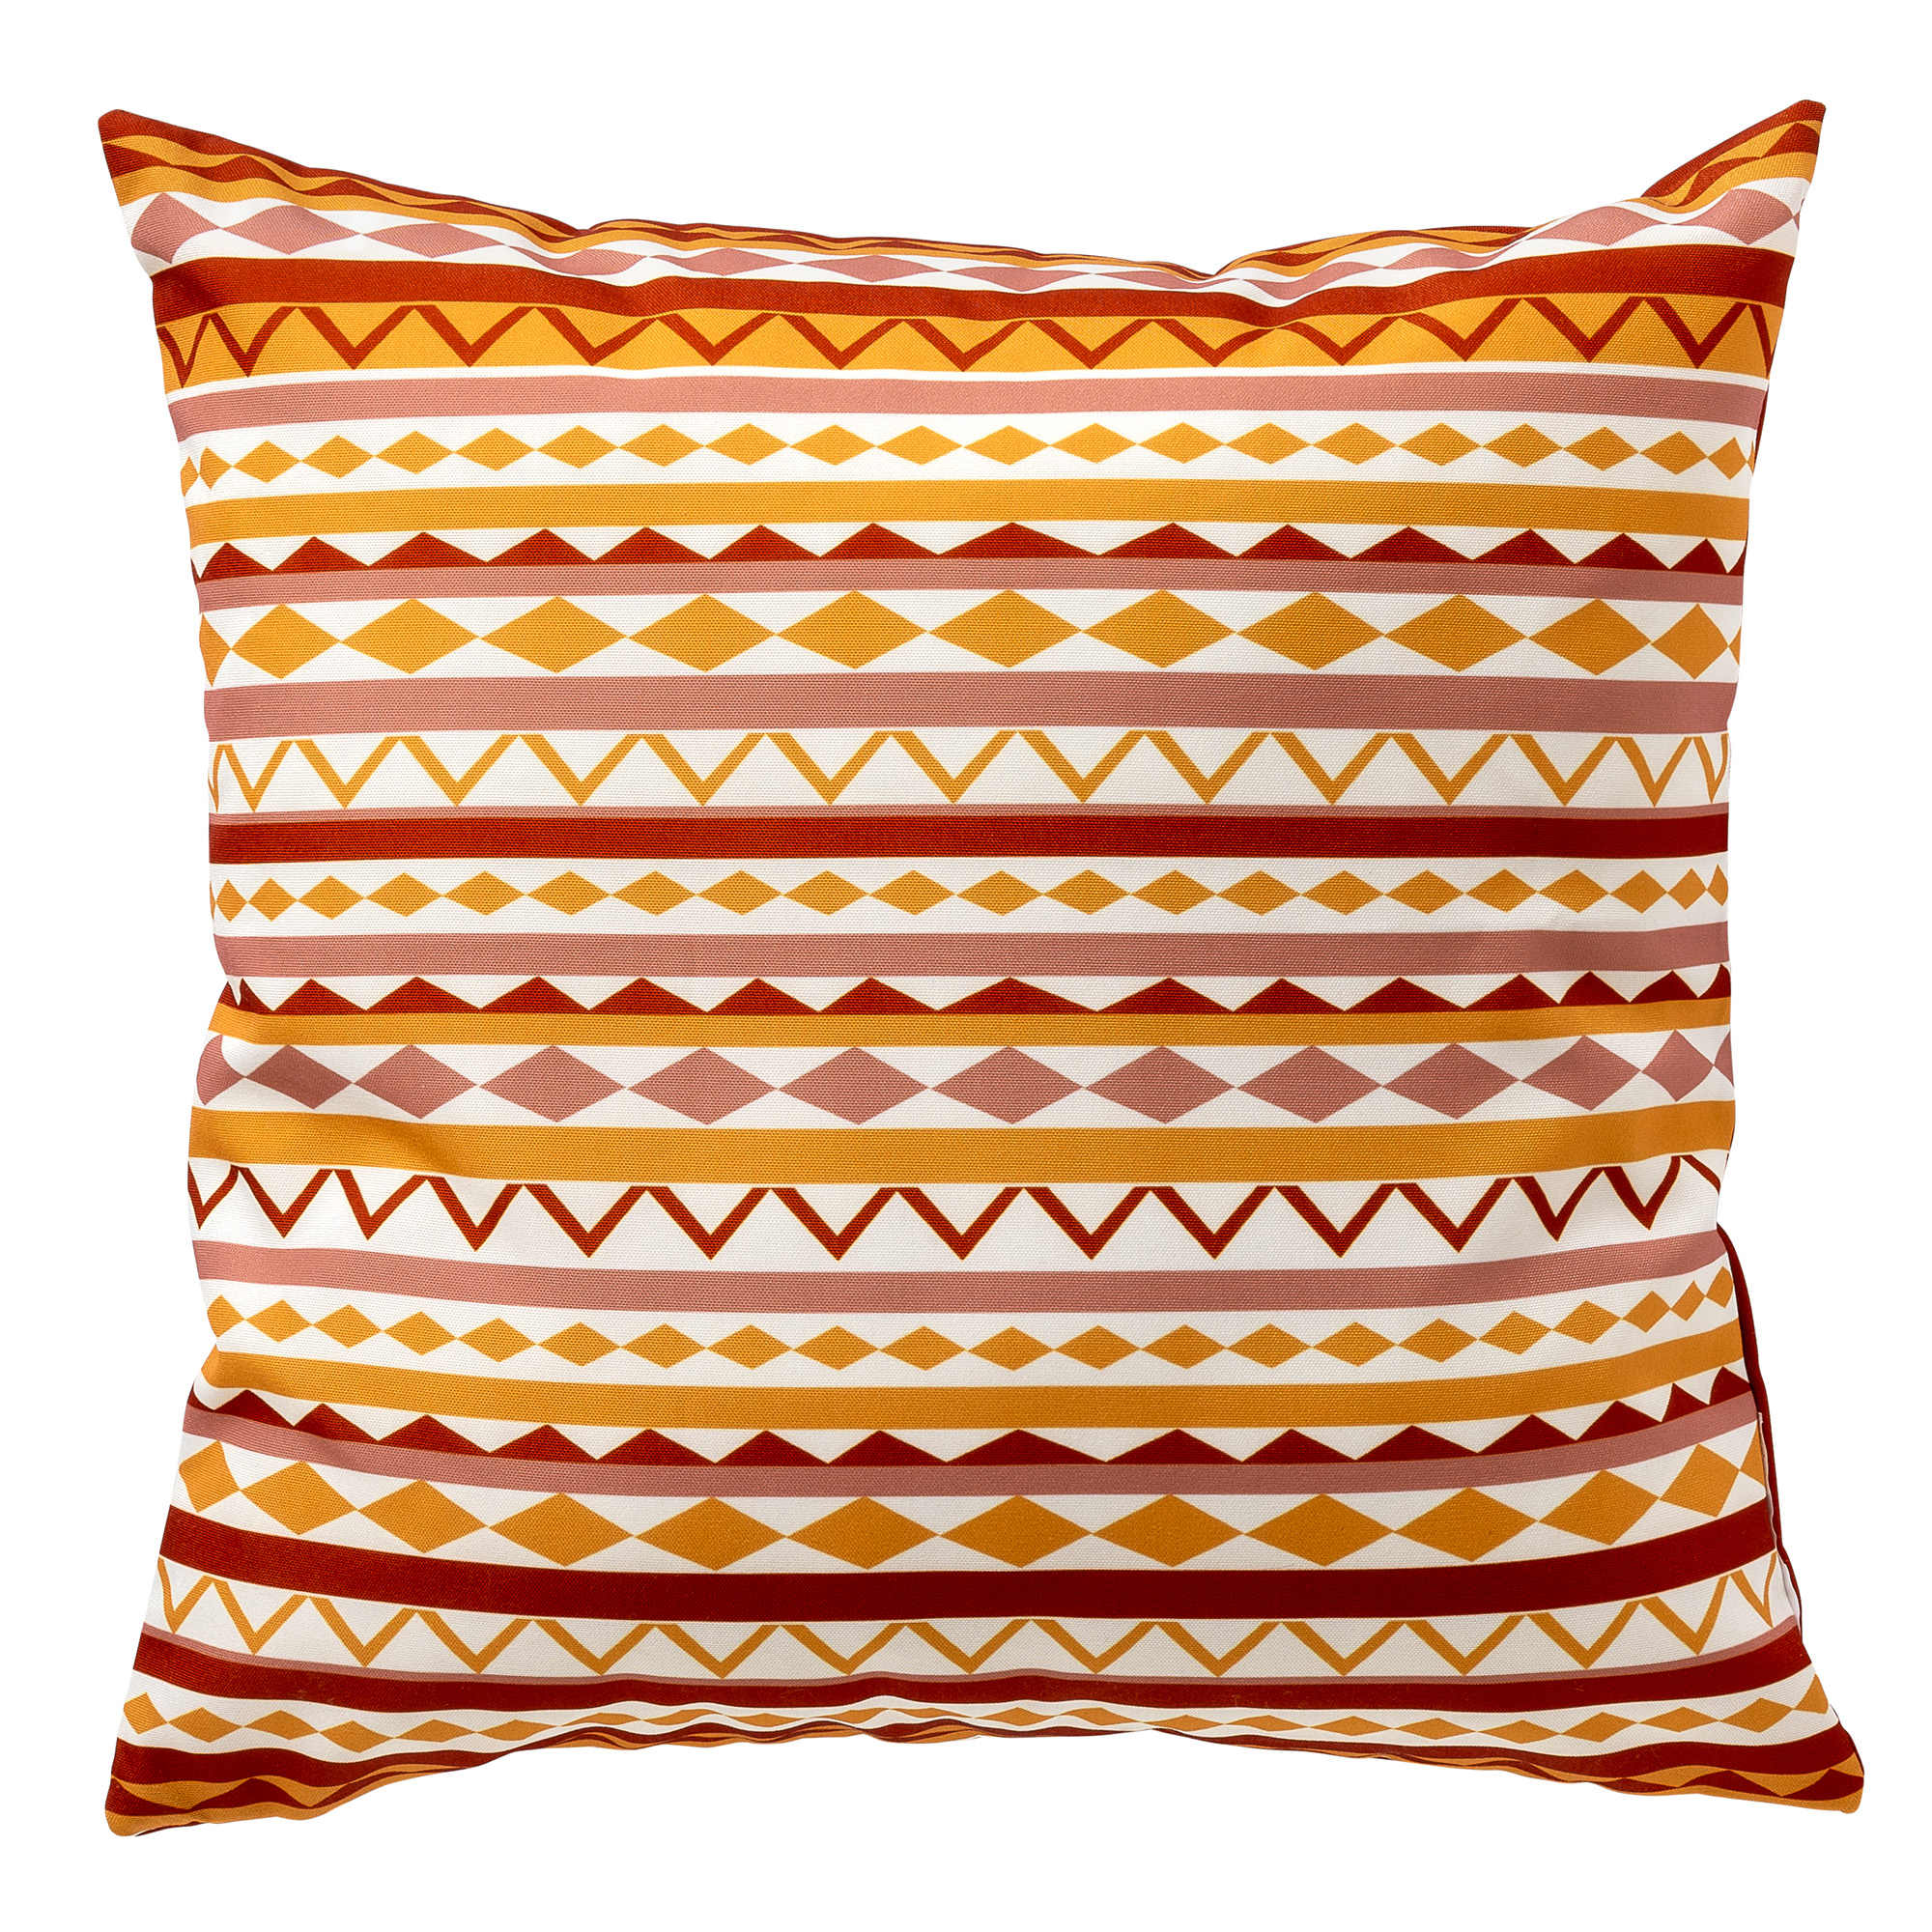 MAURO - Outdoor Cushion cover 45x45 cm Potters Clay - orange